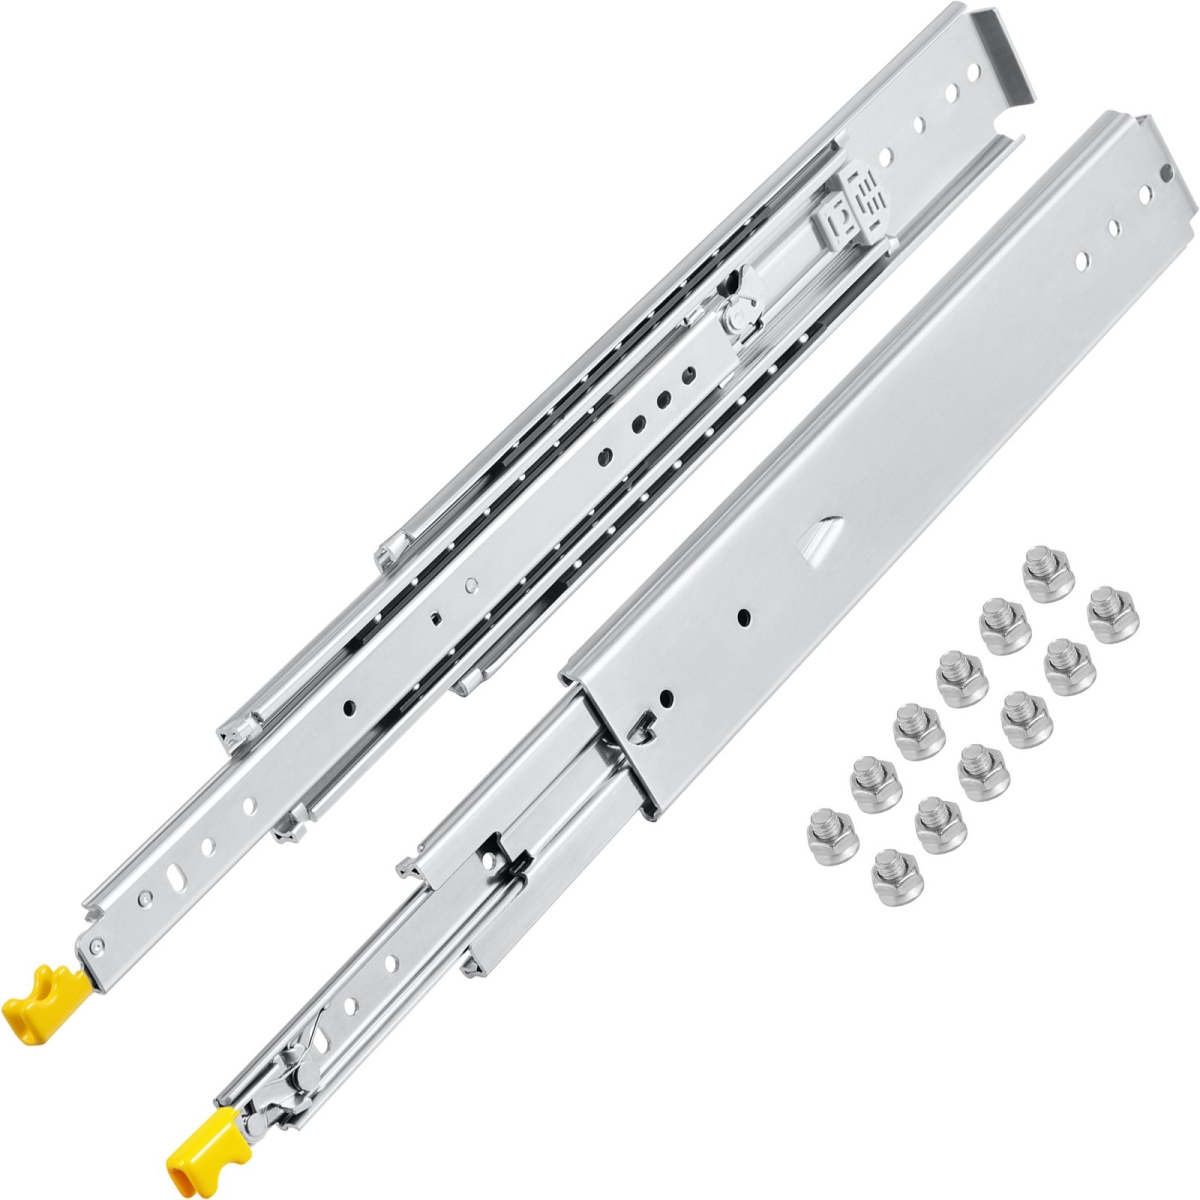 Picture of Vevor SDSSSCTD3050029G9V0 30 in. Heavy-Duty Industrial Steel Up to 500 lbs Capacity Drawer Slides with Lock - 2 Piece